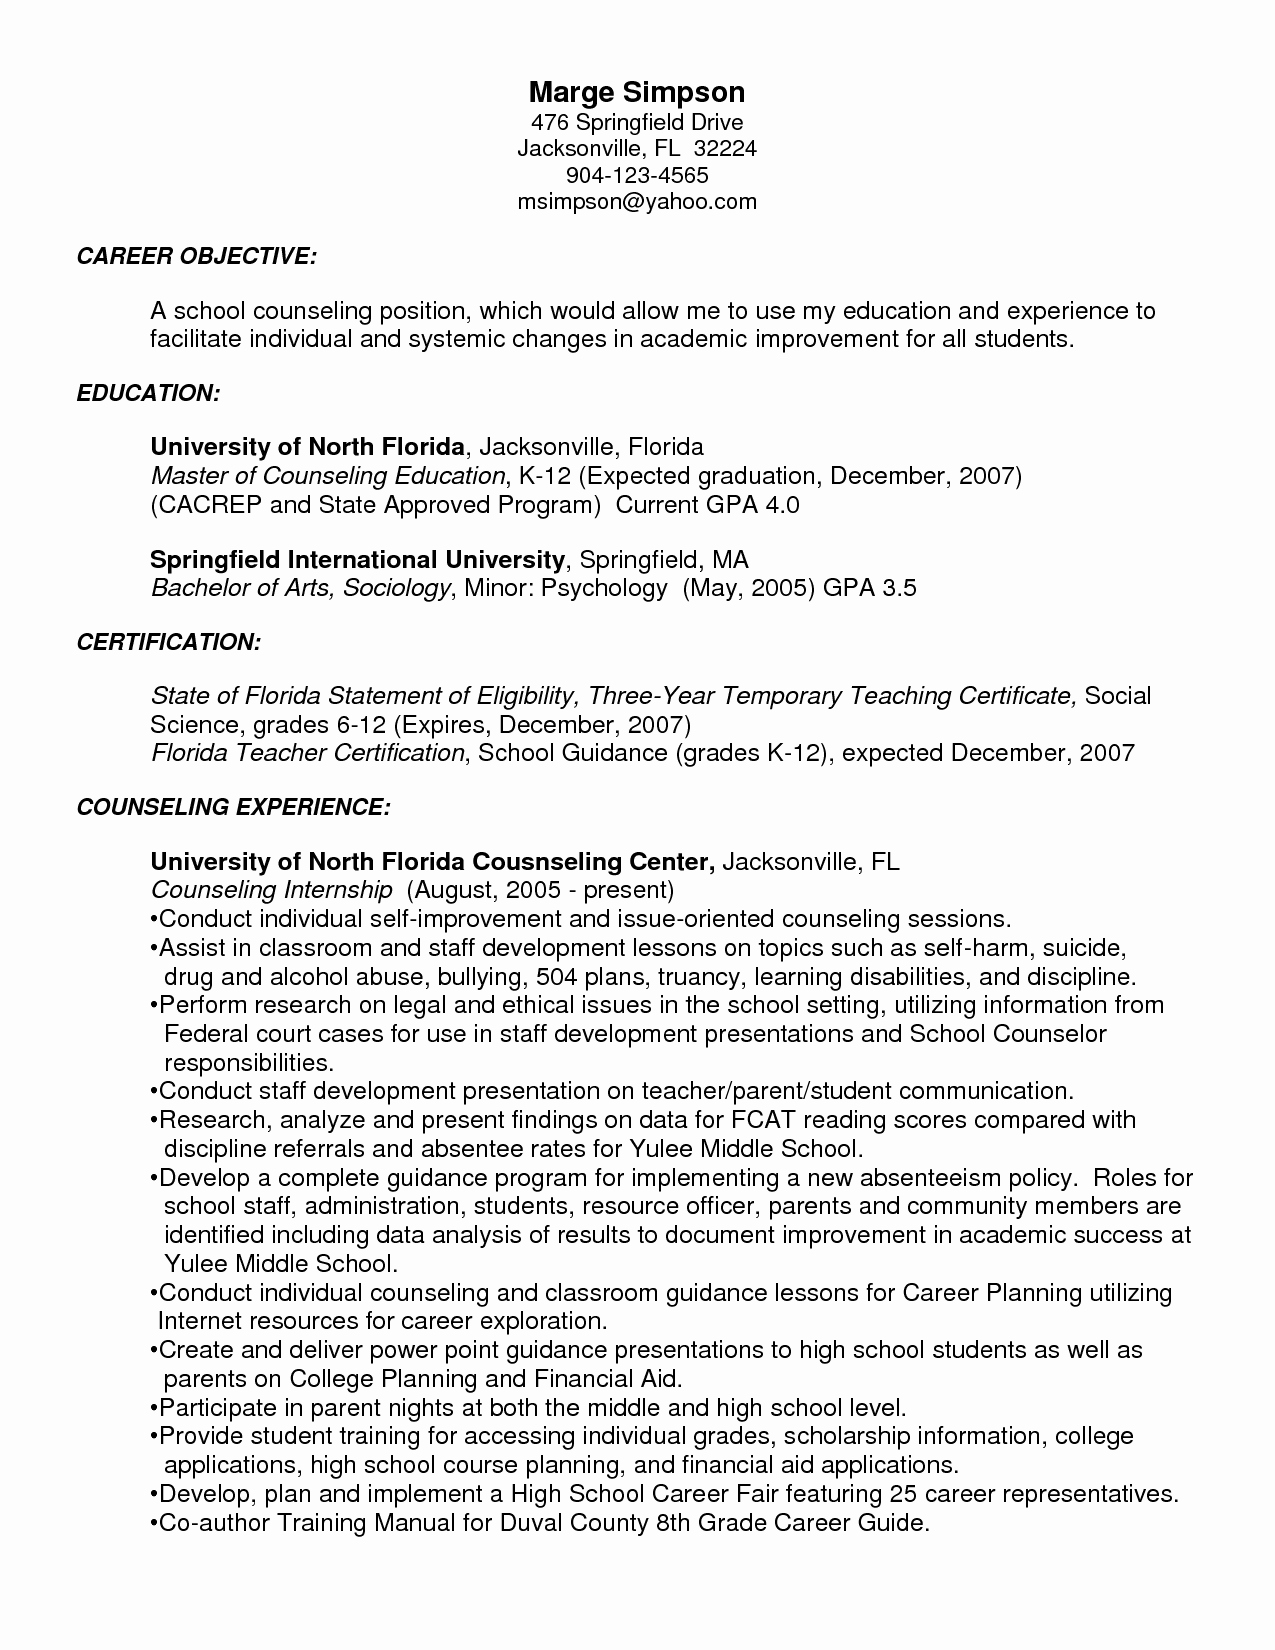 Small Business Owner Resume Sample Awesome Resume for Owner Small Business Resume Ideas